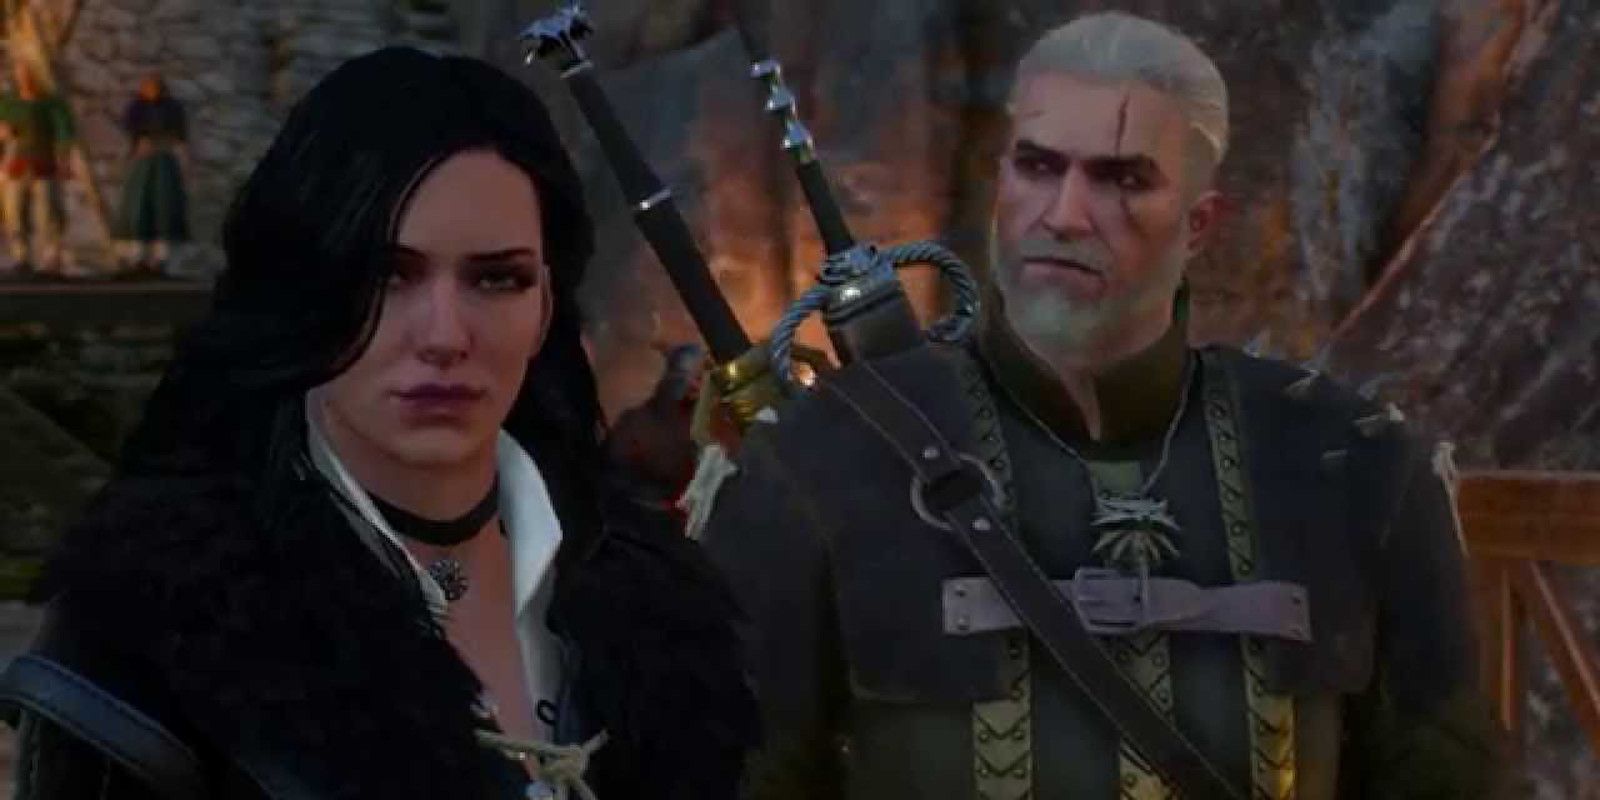 The Witcher 3 PS5 Retail Version Release Date Window Confirmed